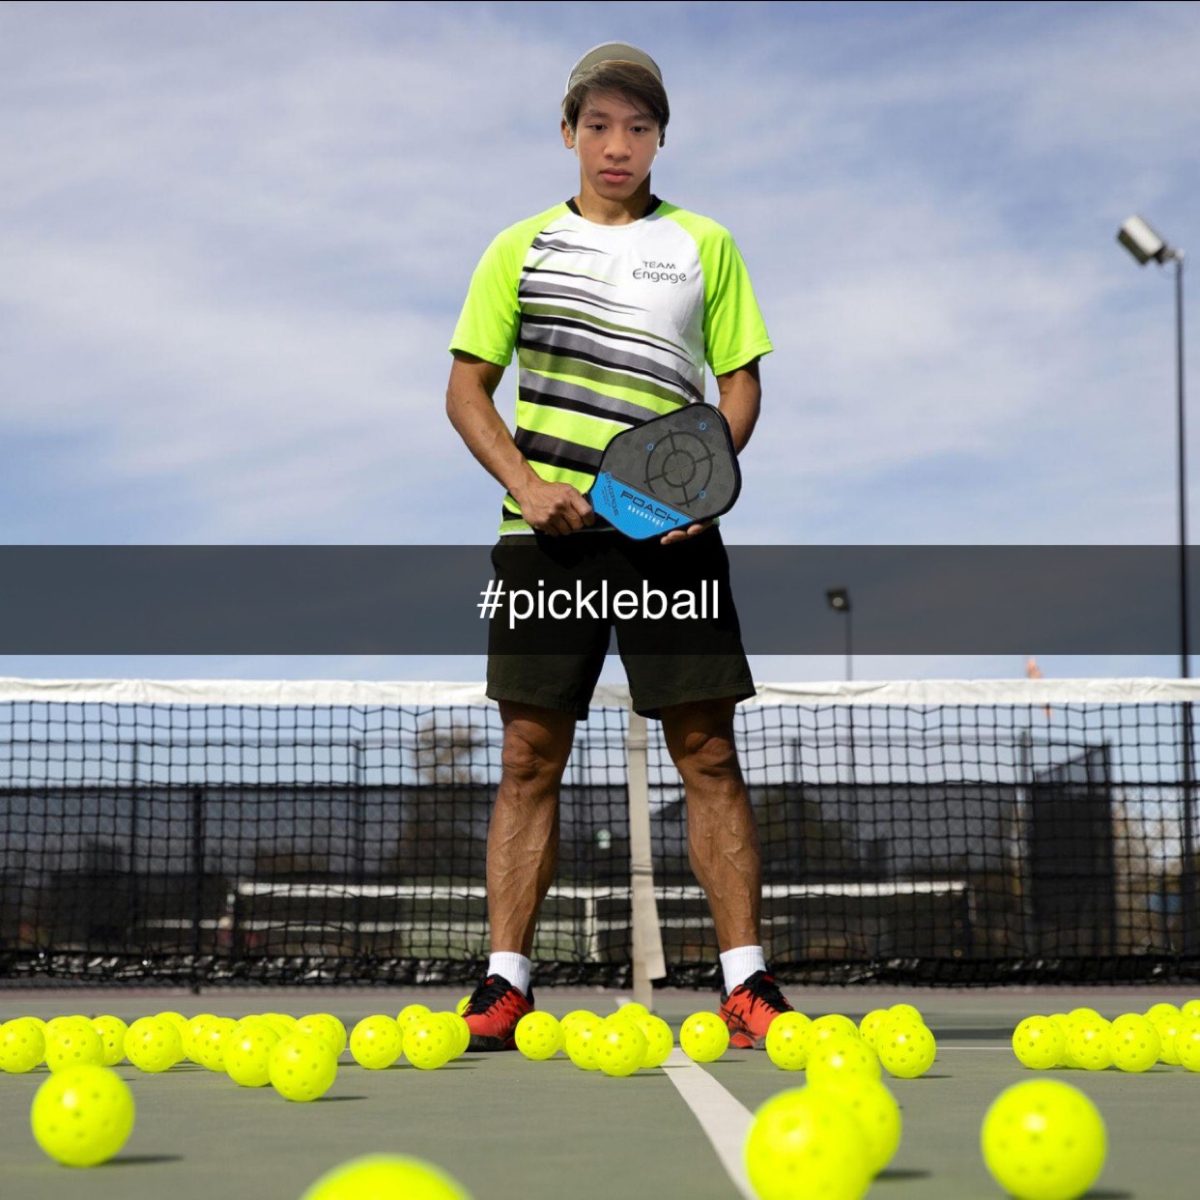 My+face+on+professional+pickleball+player+Tao+Thongvanhs+face.+%28Edited+by+John+Nguyen%2C+Photo+credits+to+The+Daily+Sentinel%29